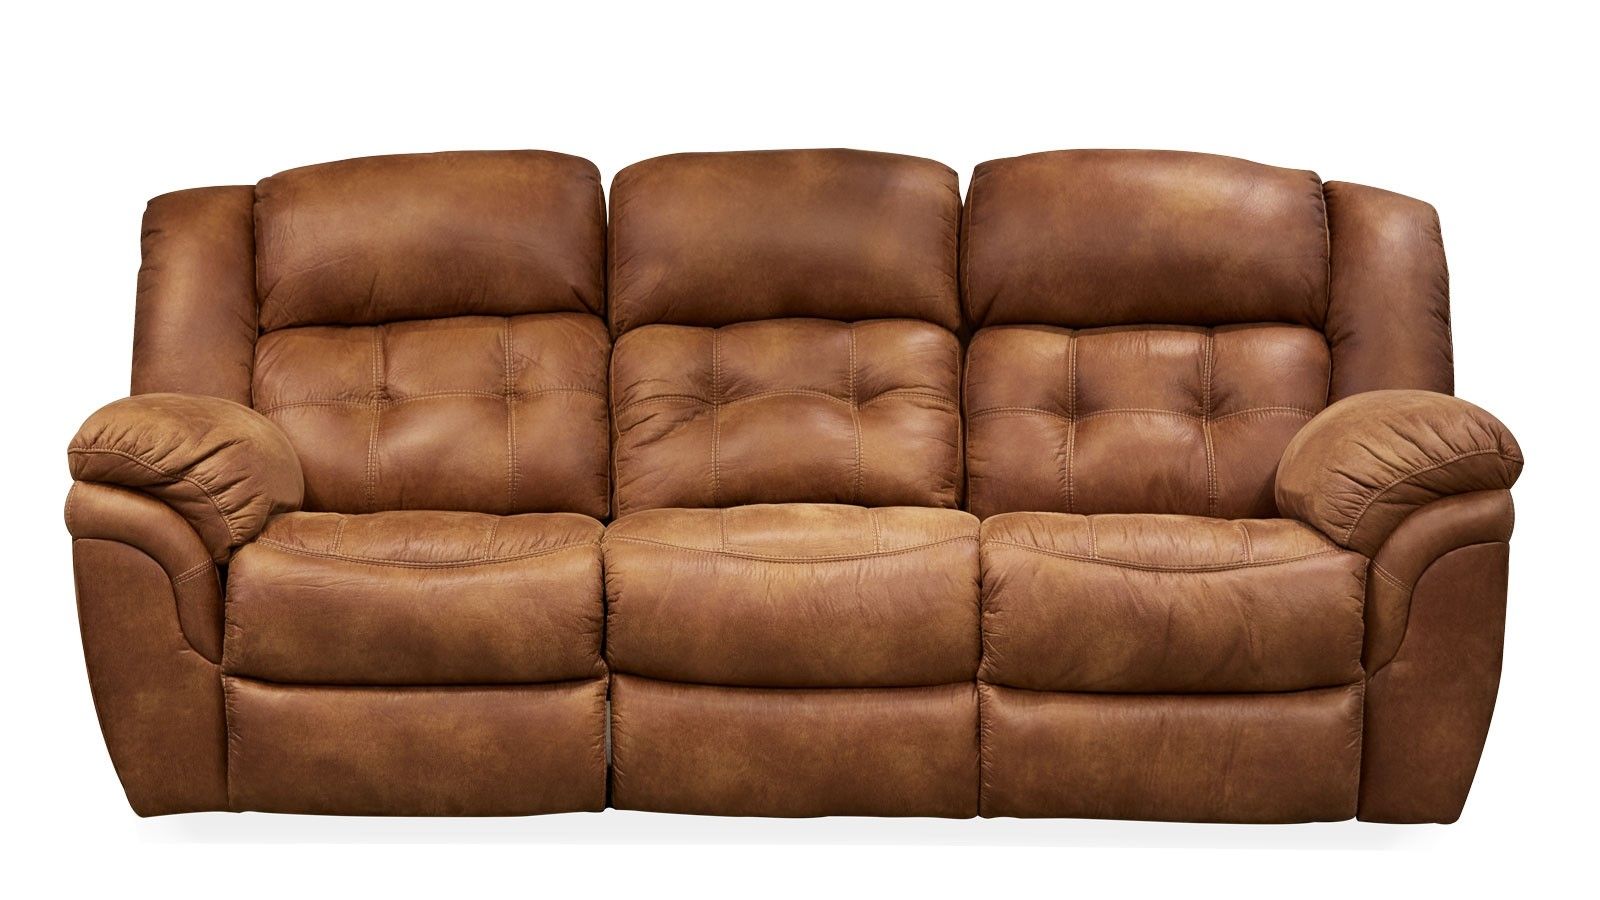 Frontier Almond Reclining Sofa Gallery Furniture In Recliner Sofa Chairs (View 11 of 15)